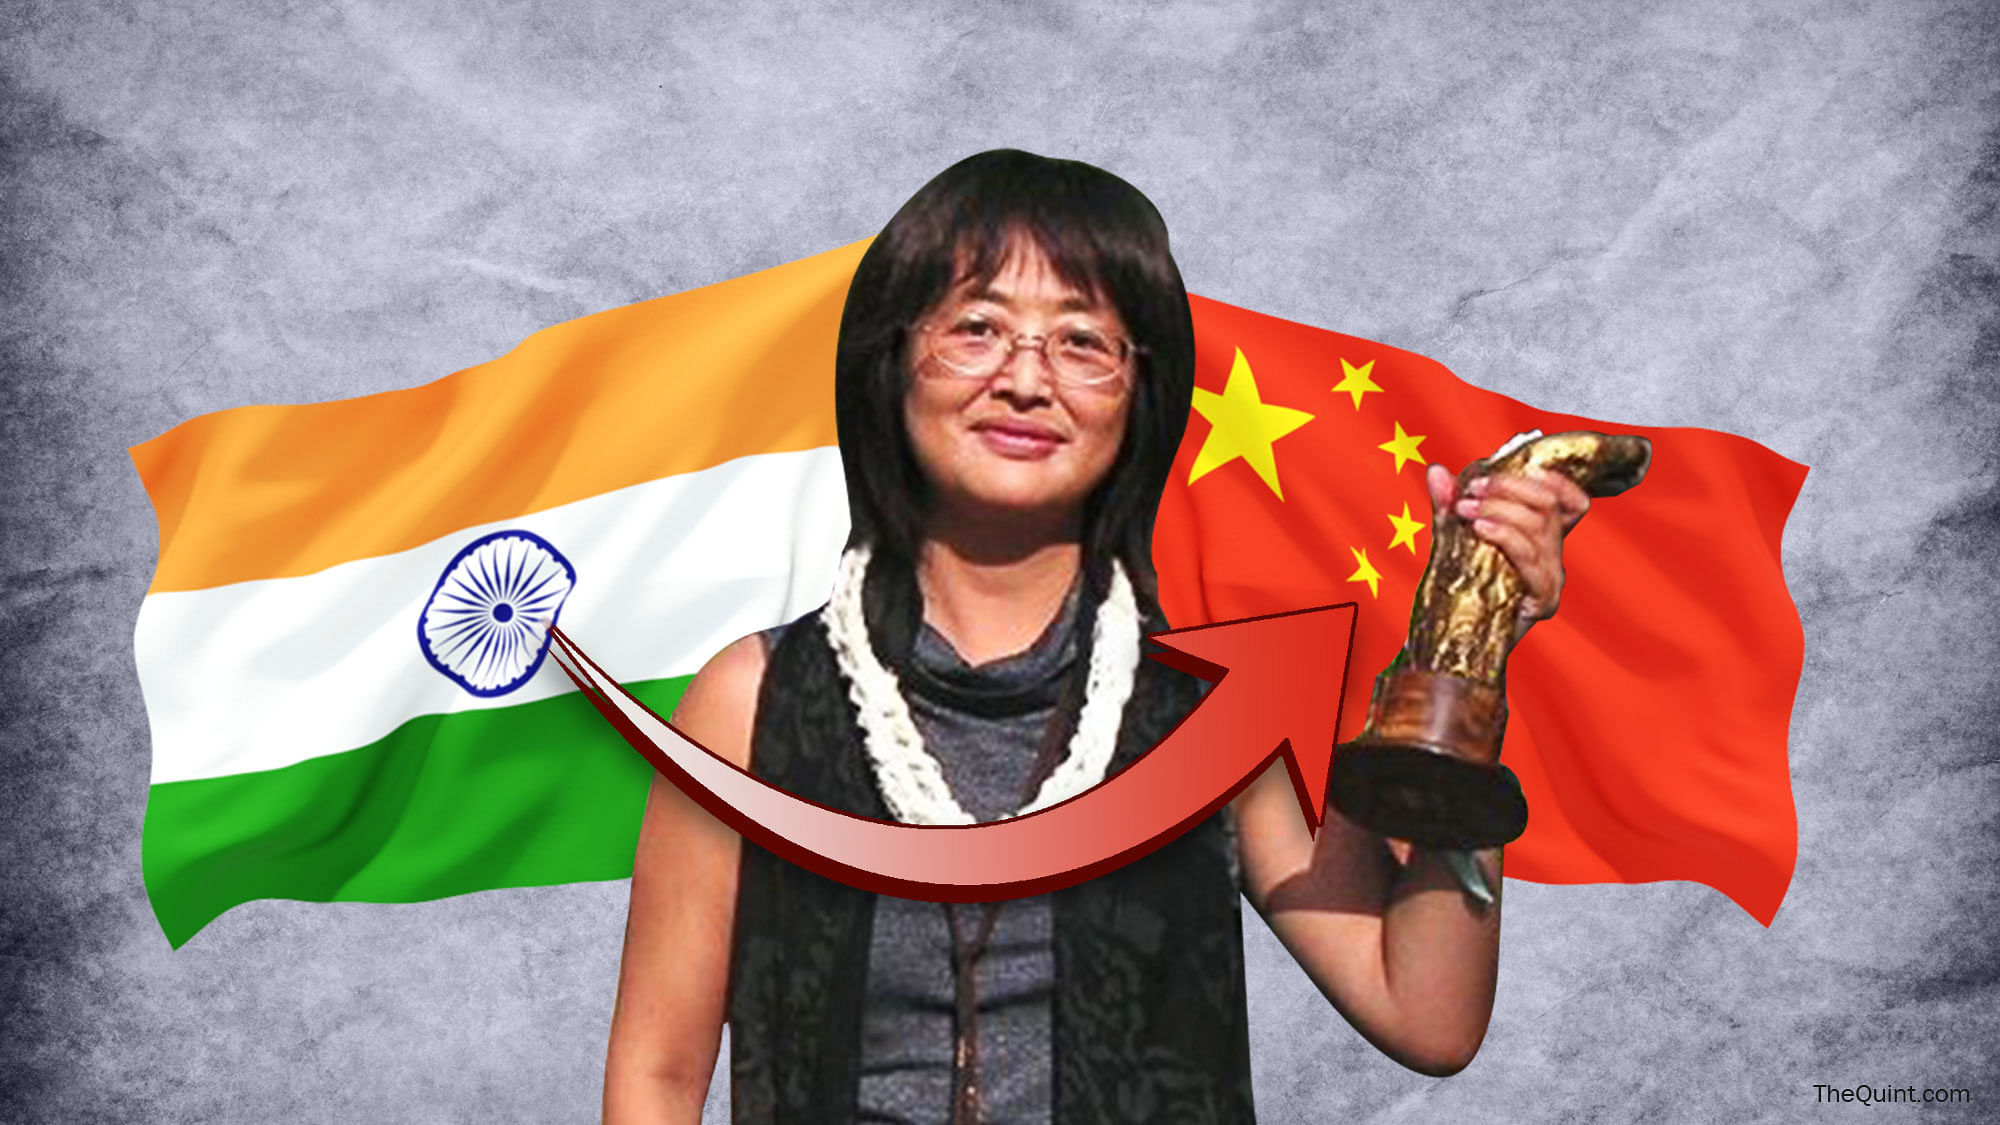 Tang Lu is unofficially accused of spying by government of India that has refused to extend her visa, forcing her to leave India by 31 July.&nbsp;